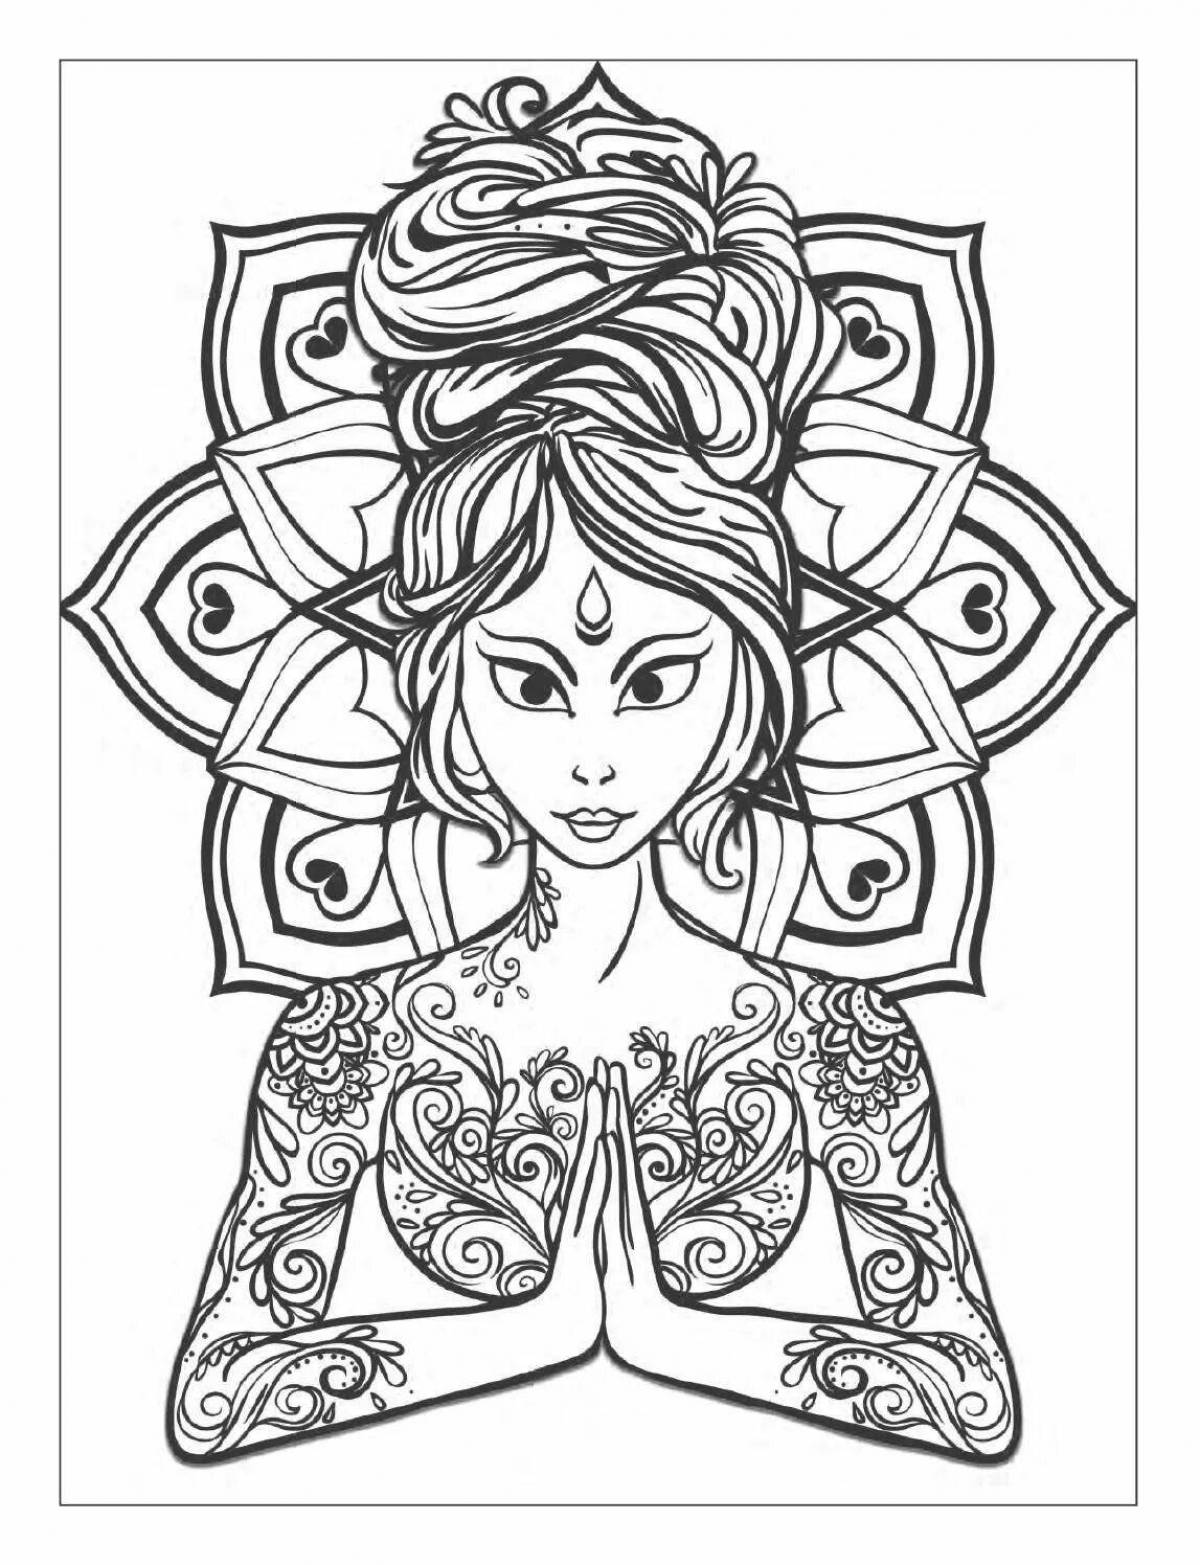 Soothing coloring book antistress art yoga